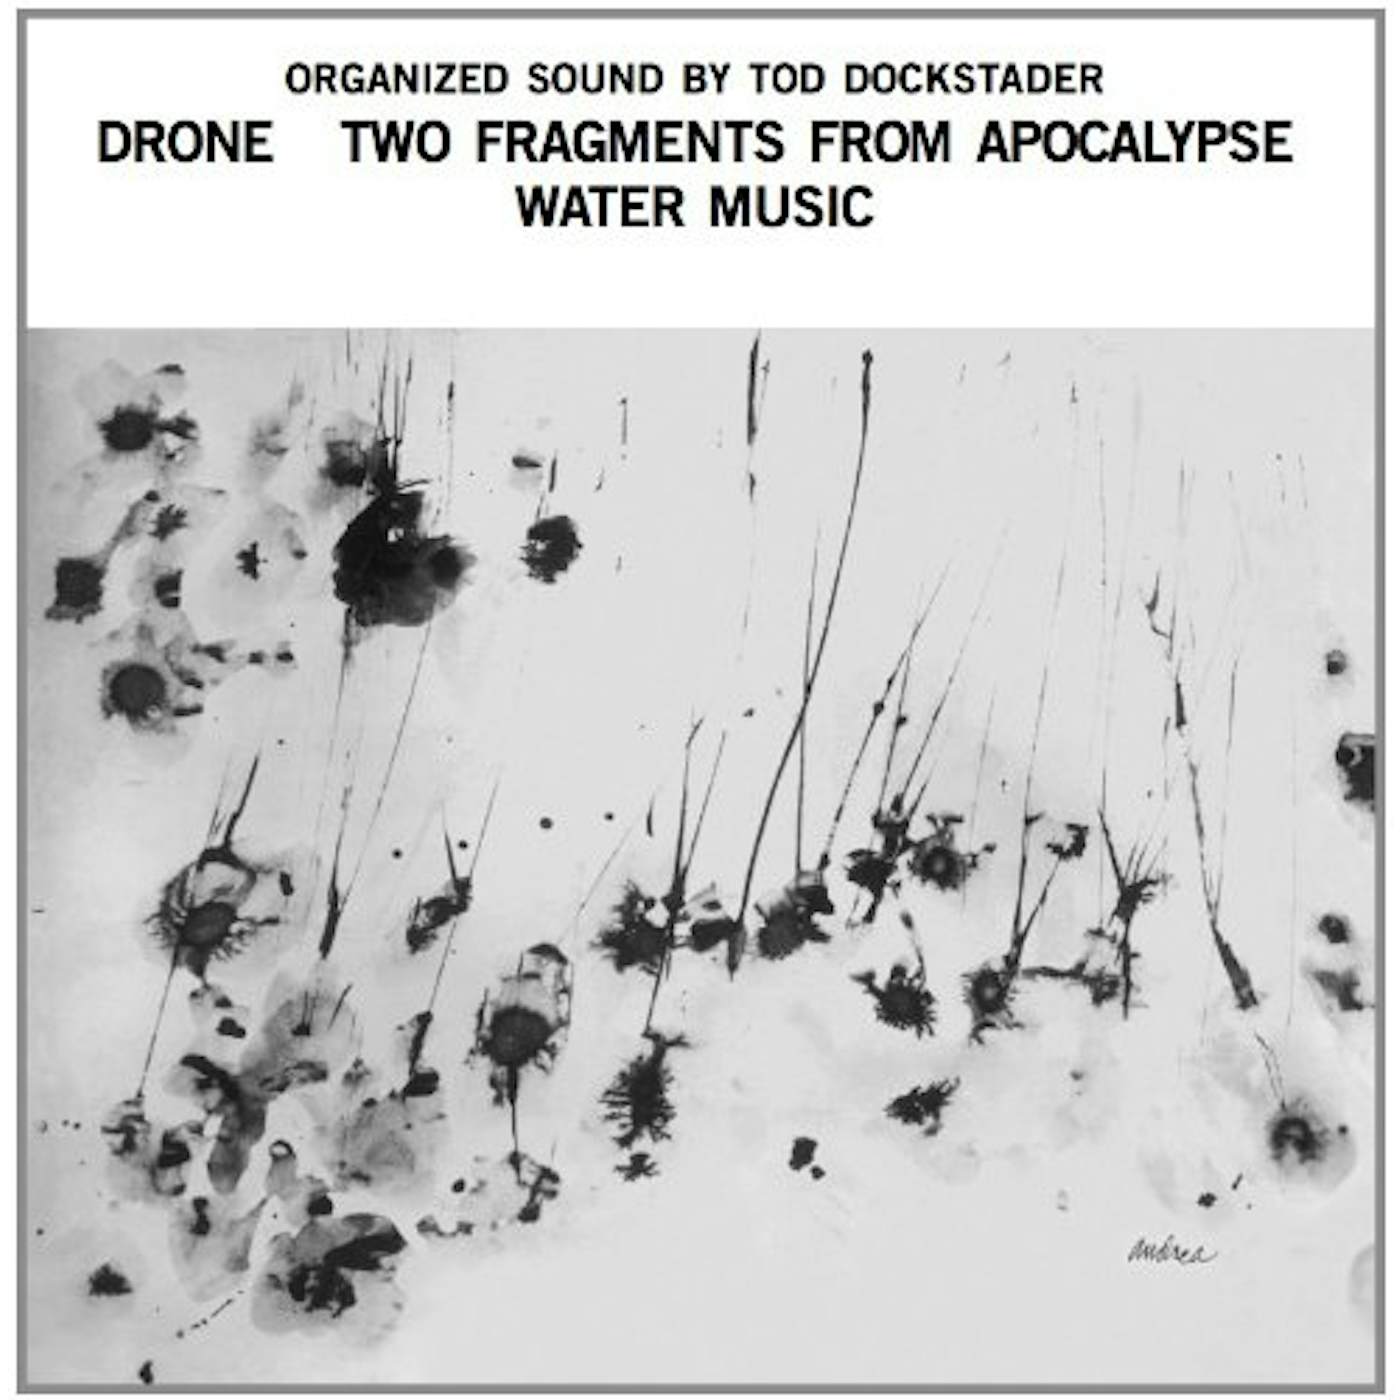 Tod Dockstader ORGANIZED SOUND: DRONE TWO FRAGMENTS FROM APOCALYP Vinyl Record